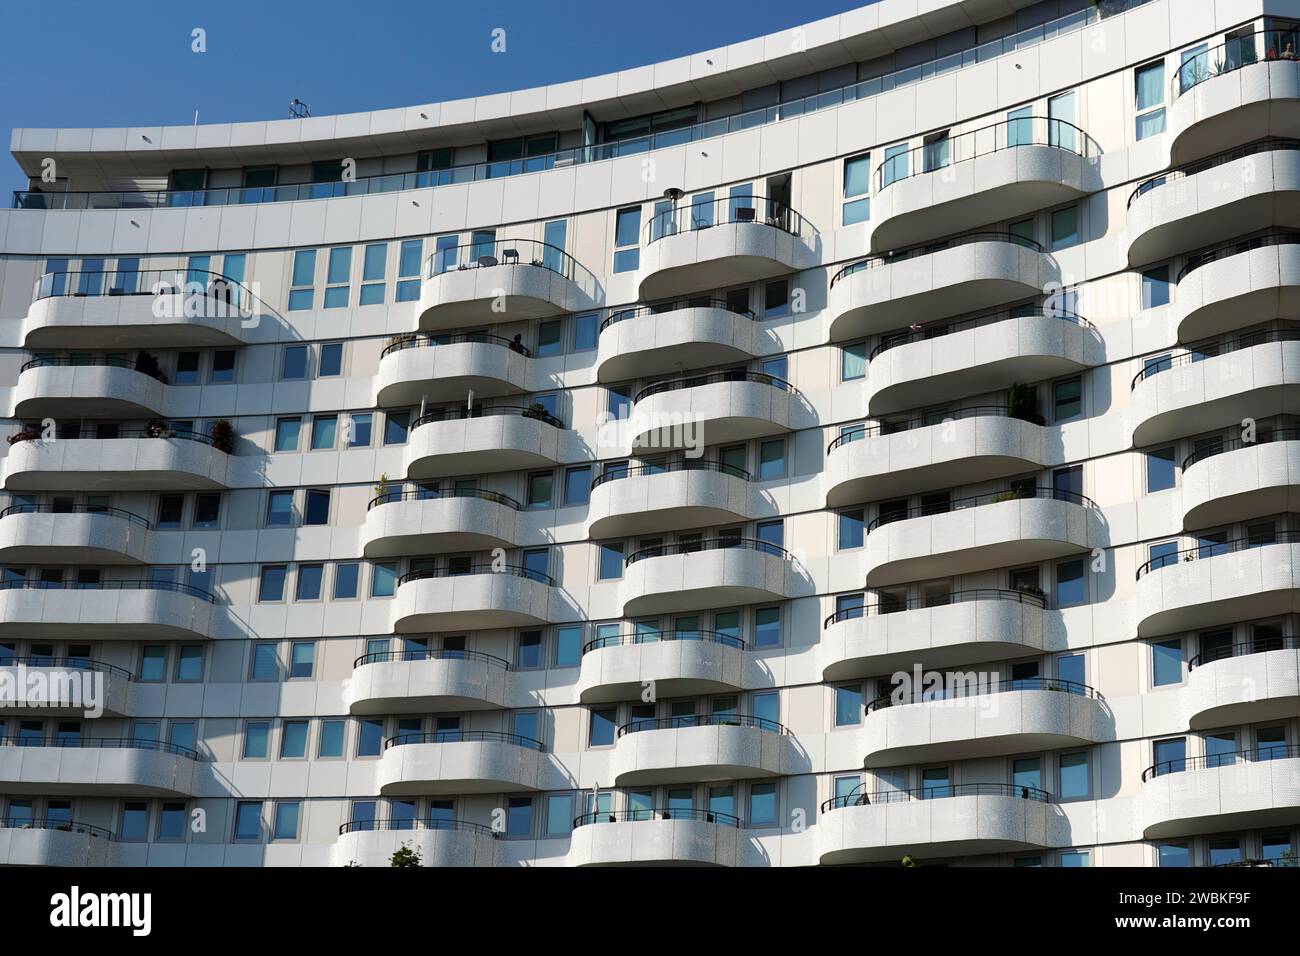 Germany, North Rhine-Westphalia, Cologne, modern residential complex, facade, curved balconies Stock Photo